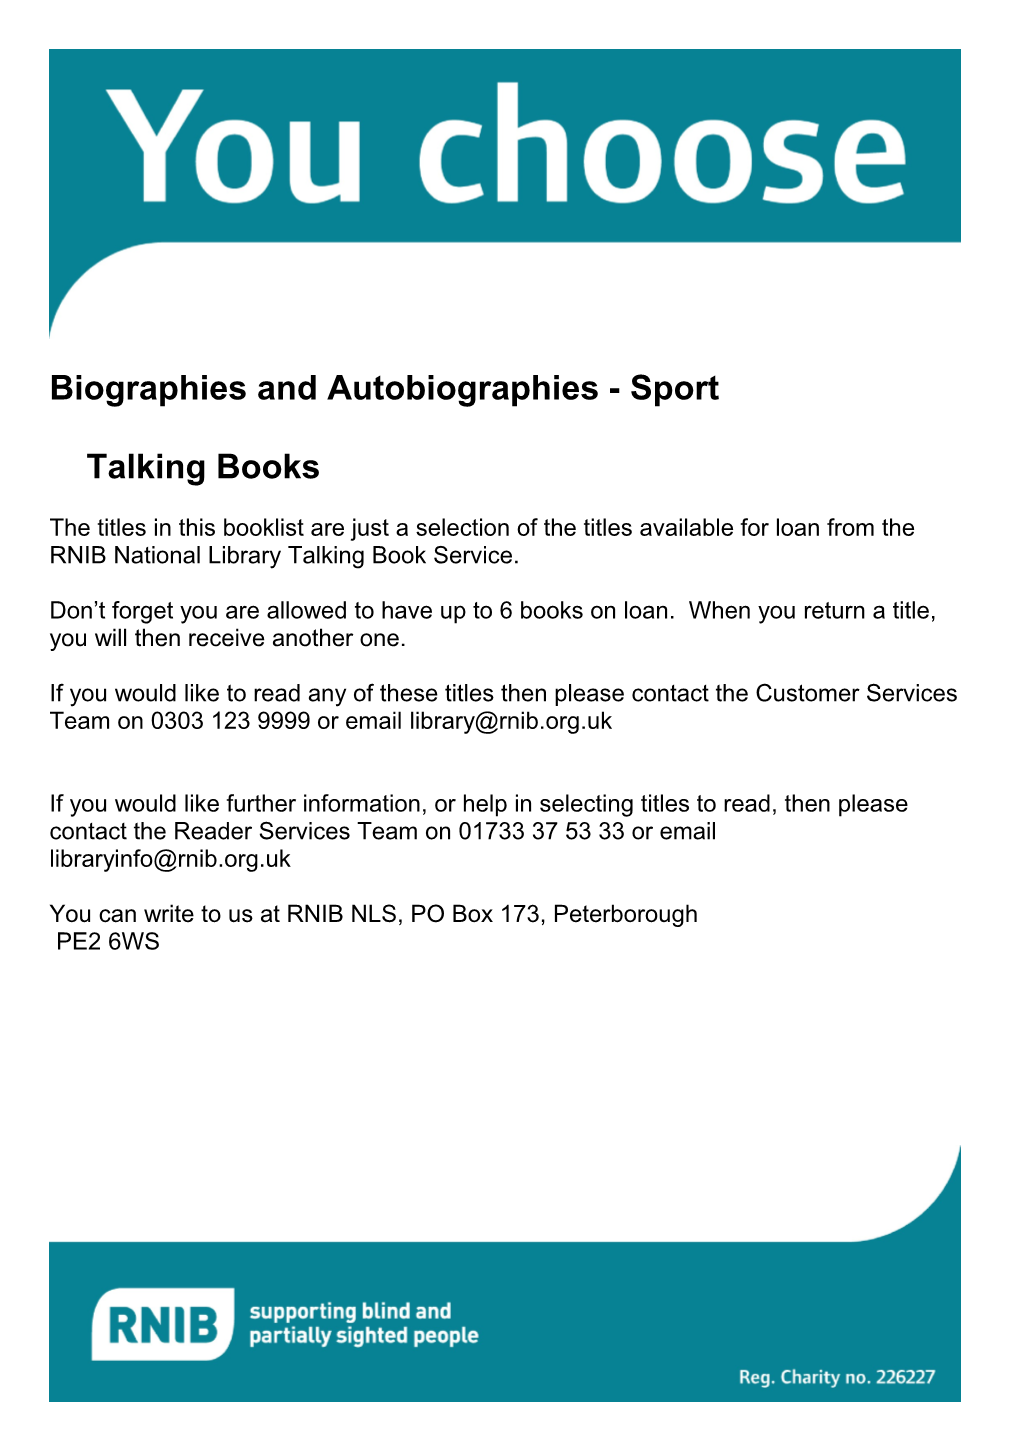 Sport, Biographies and Autobiographies Book List (Talking Books)